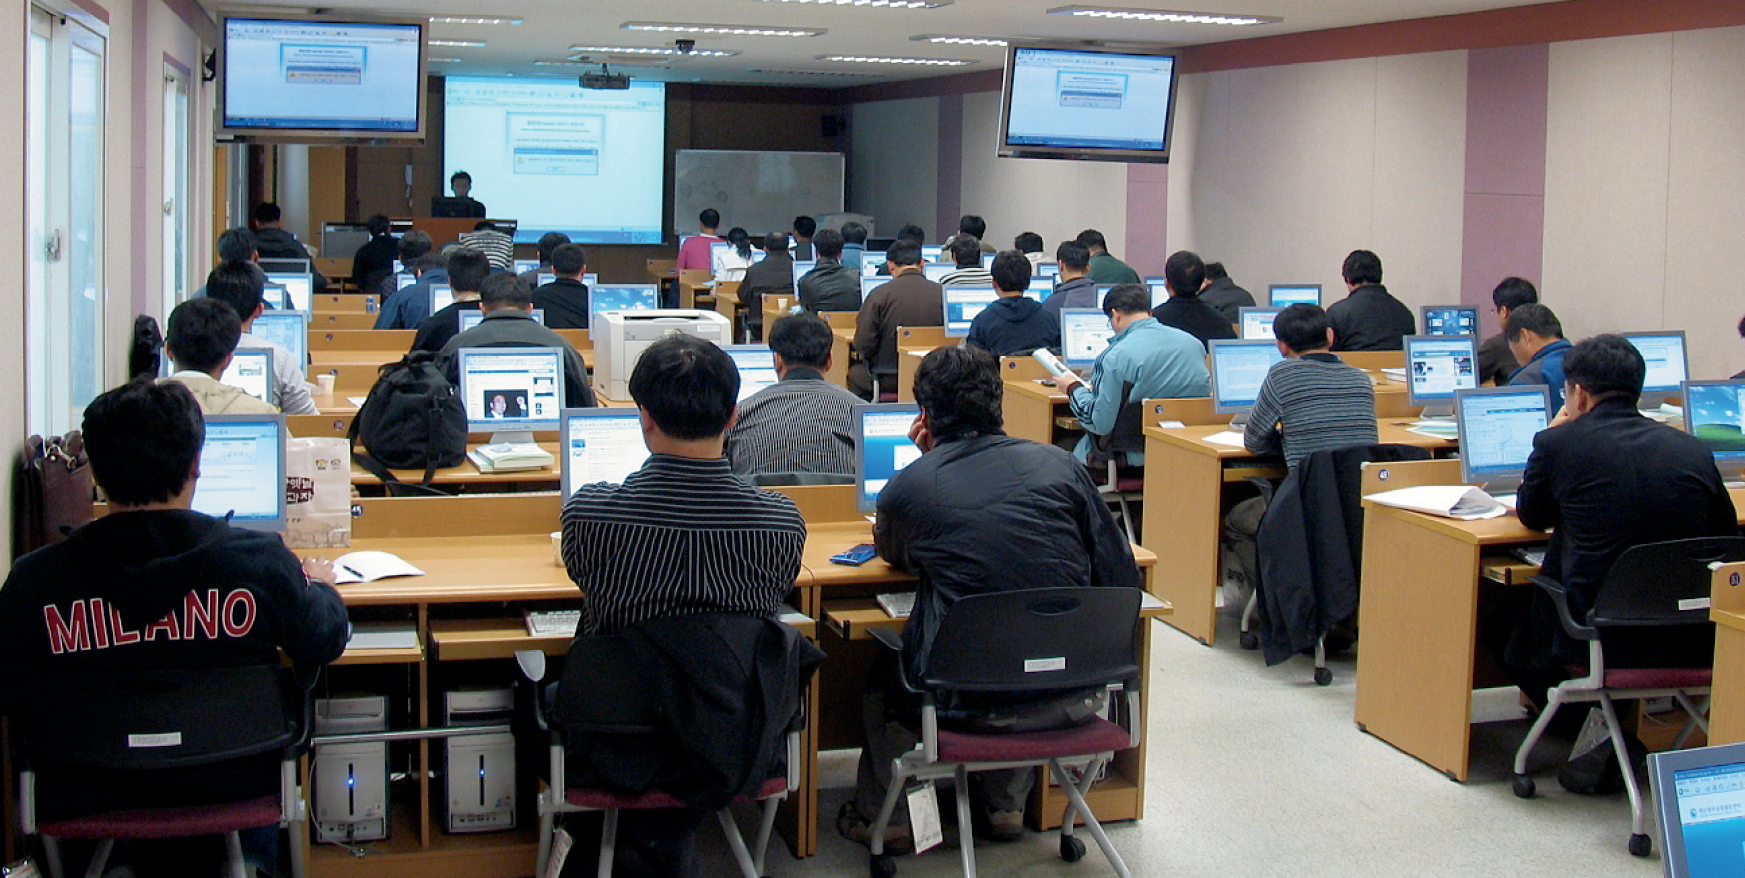 Students look at computers in a classroom at the National Disaster Management System Information Centre. A teacher at the front of the room is showing a PowerPoint presentation on a large screen.